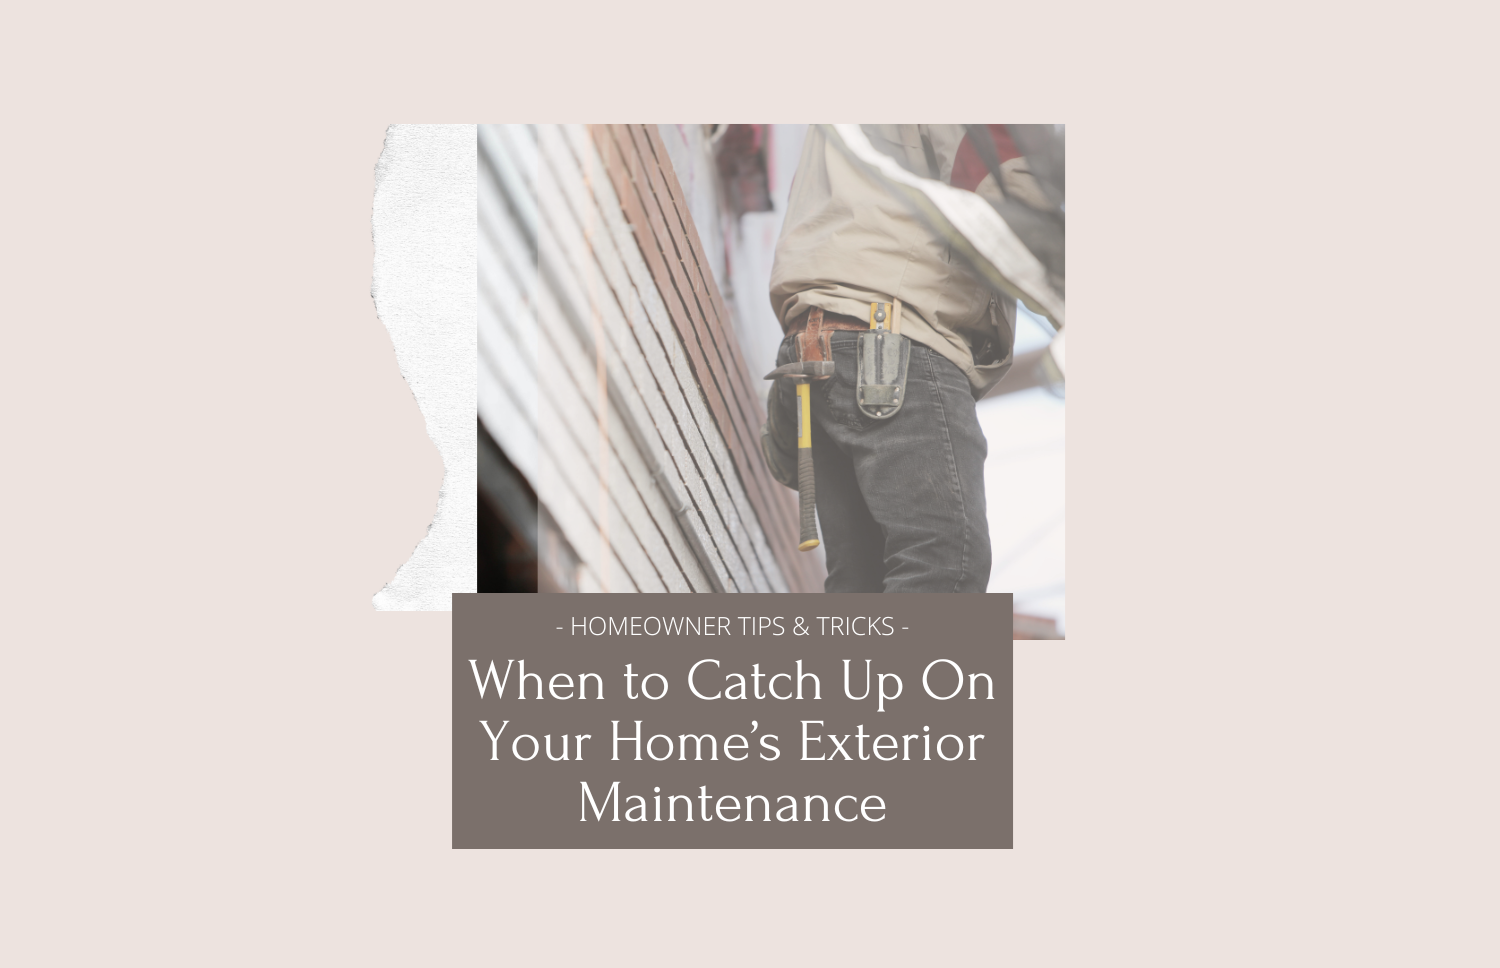 When To Catch Up On Your Home's Exterior Maintenance